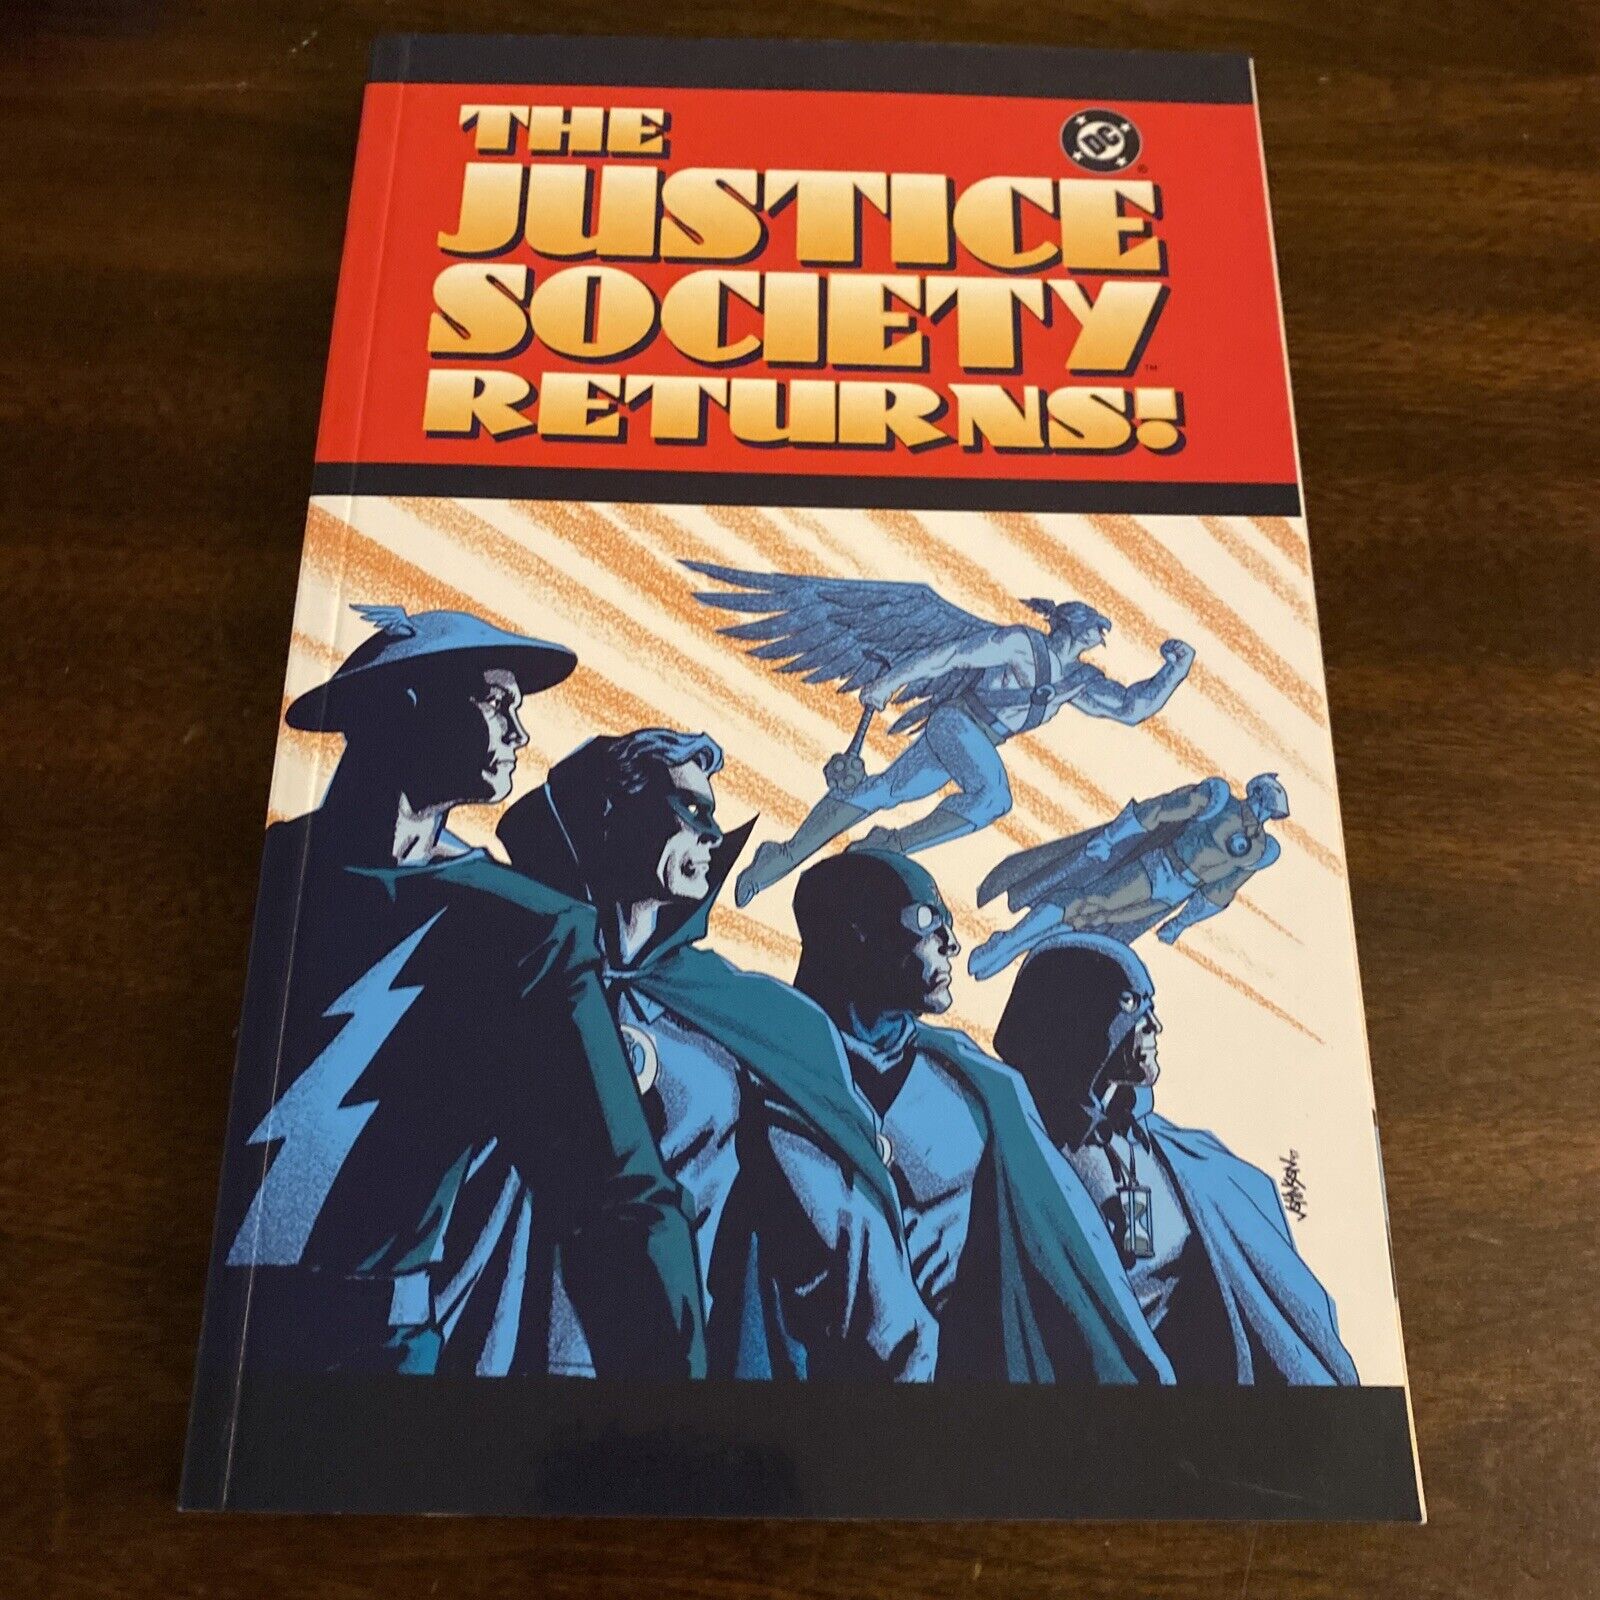 Justice Society Returns by David S. Goyer, Ron Marz, James Robinson, Geoff Johns